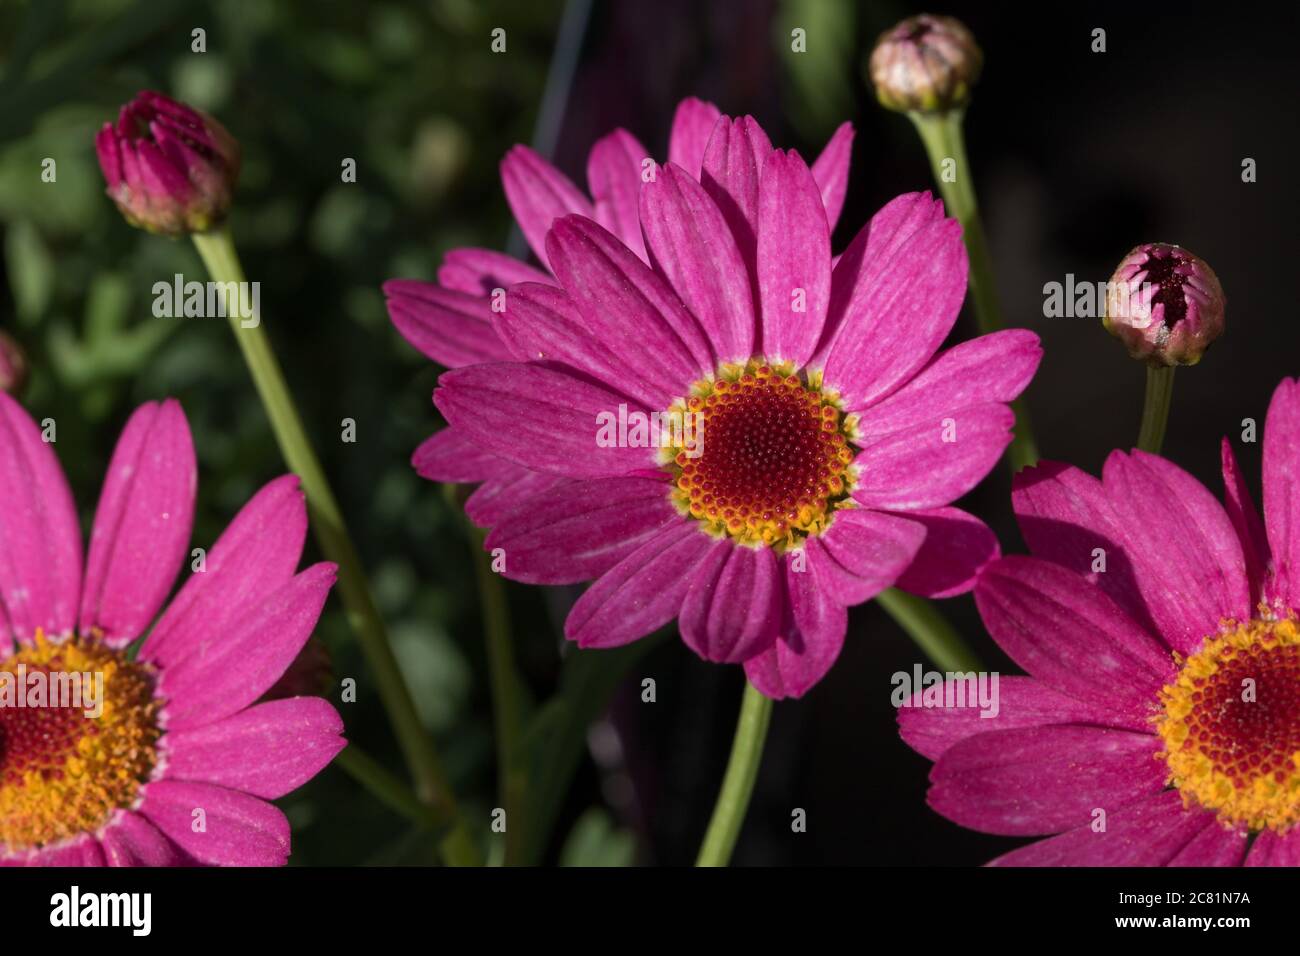 Vivid pink Chrysanthemum flowers with yellow and dark red centres, Harrogate, North Yorkshire, England, UK. Stock Photo